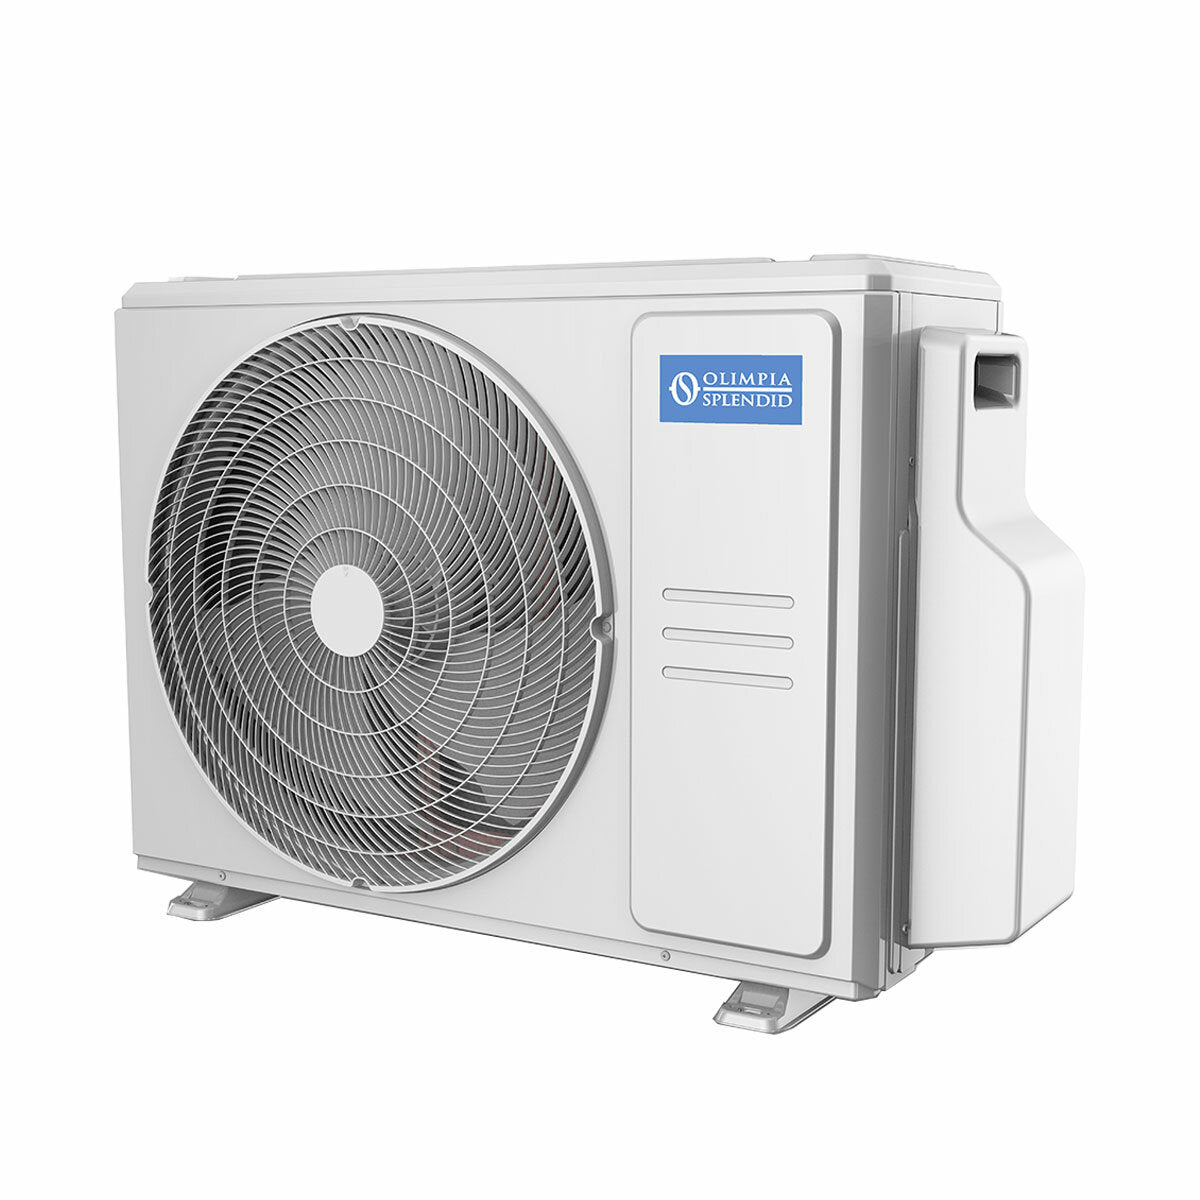 Olimpia Splendid Nexya S5 E Duct 36.000 BTU Ductable air conditioner inverter A++ R32